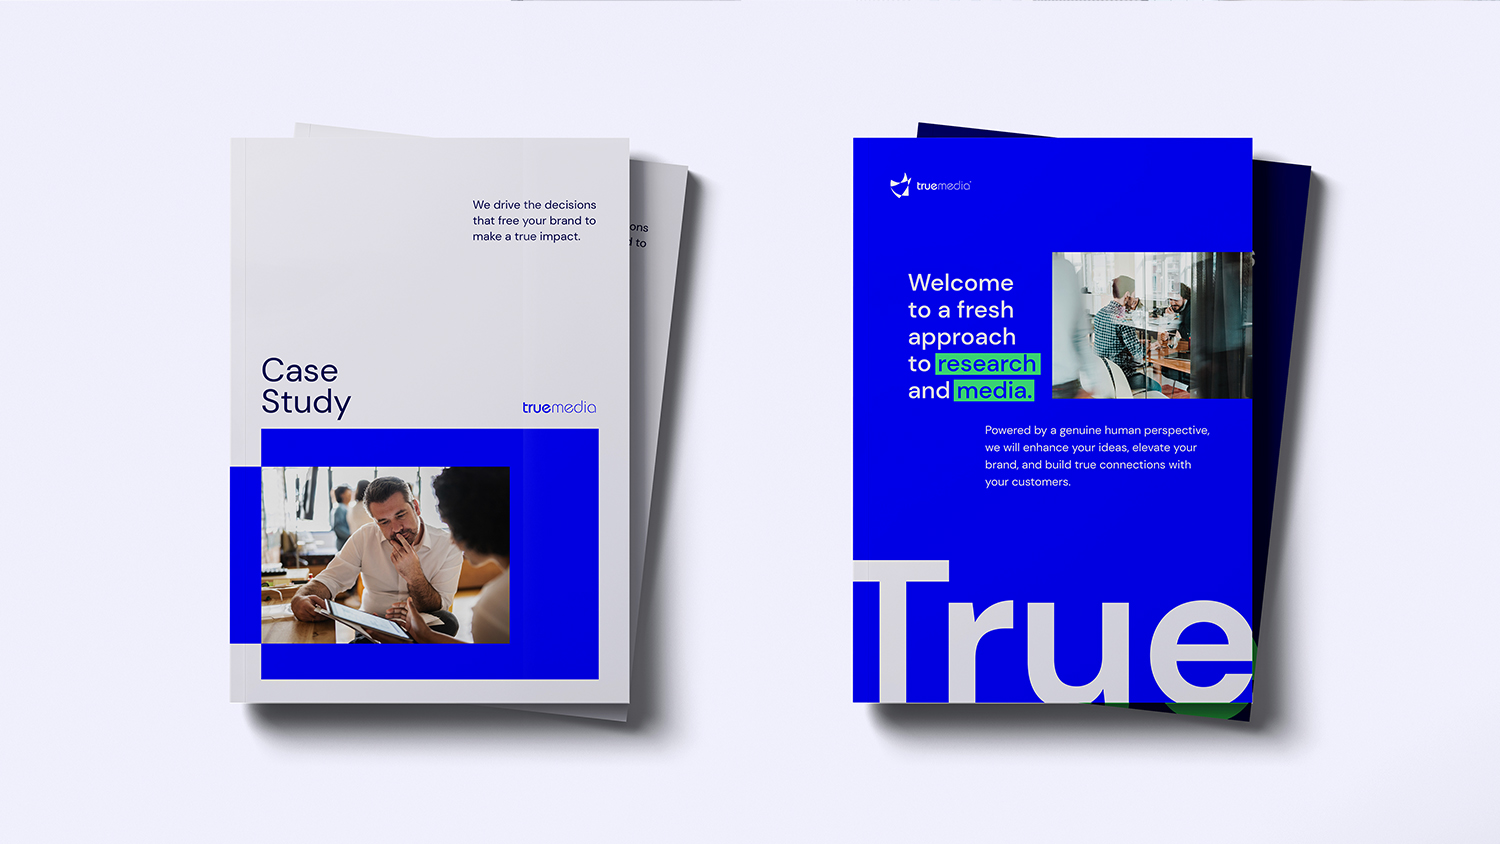 Case study and other sales materials featuring True Media's new visual brand